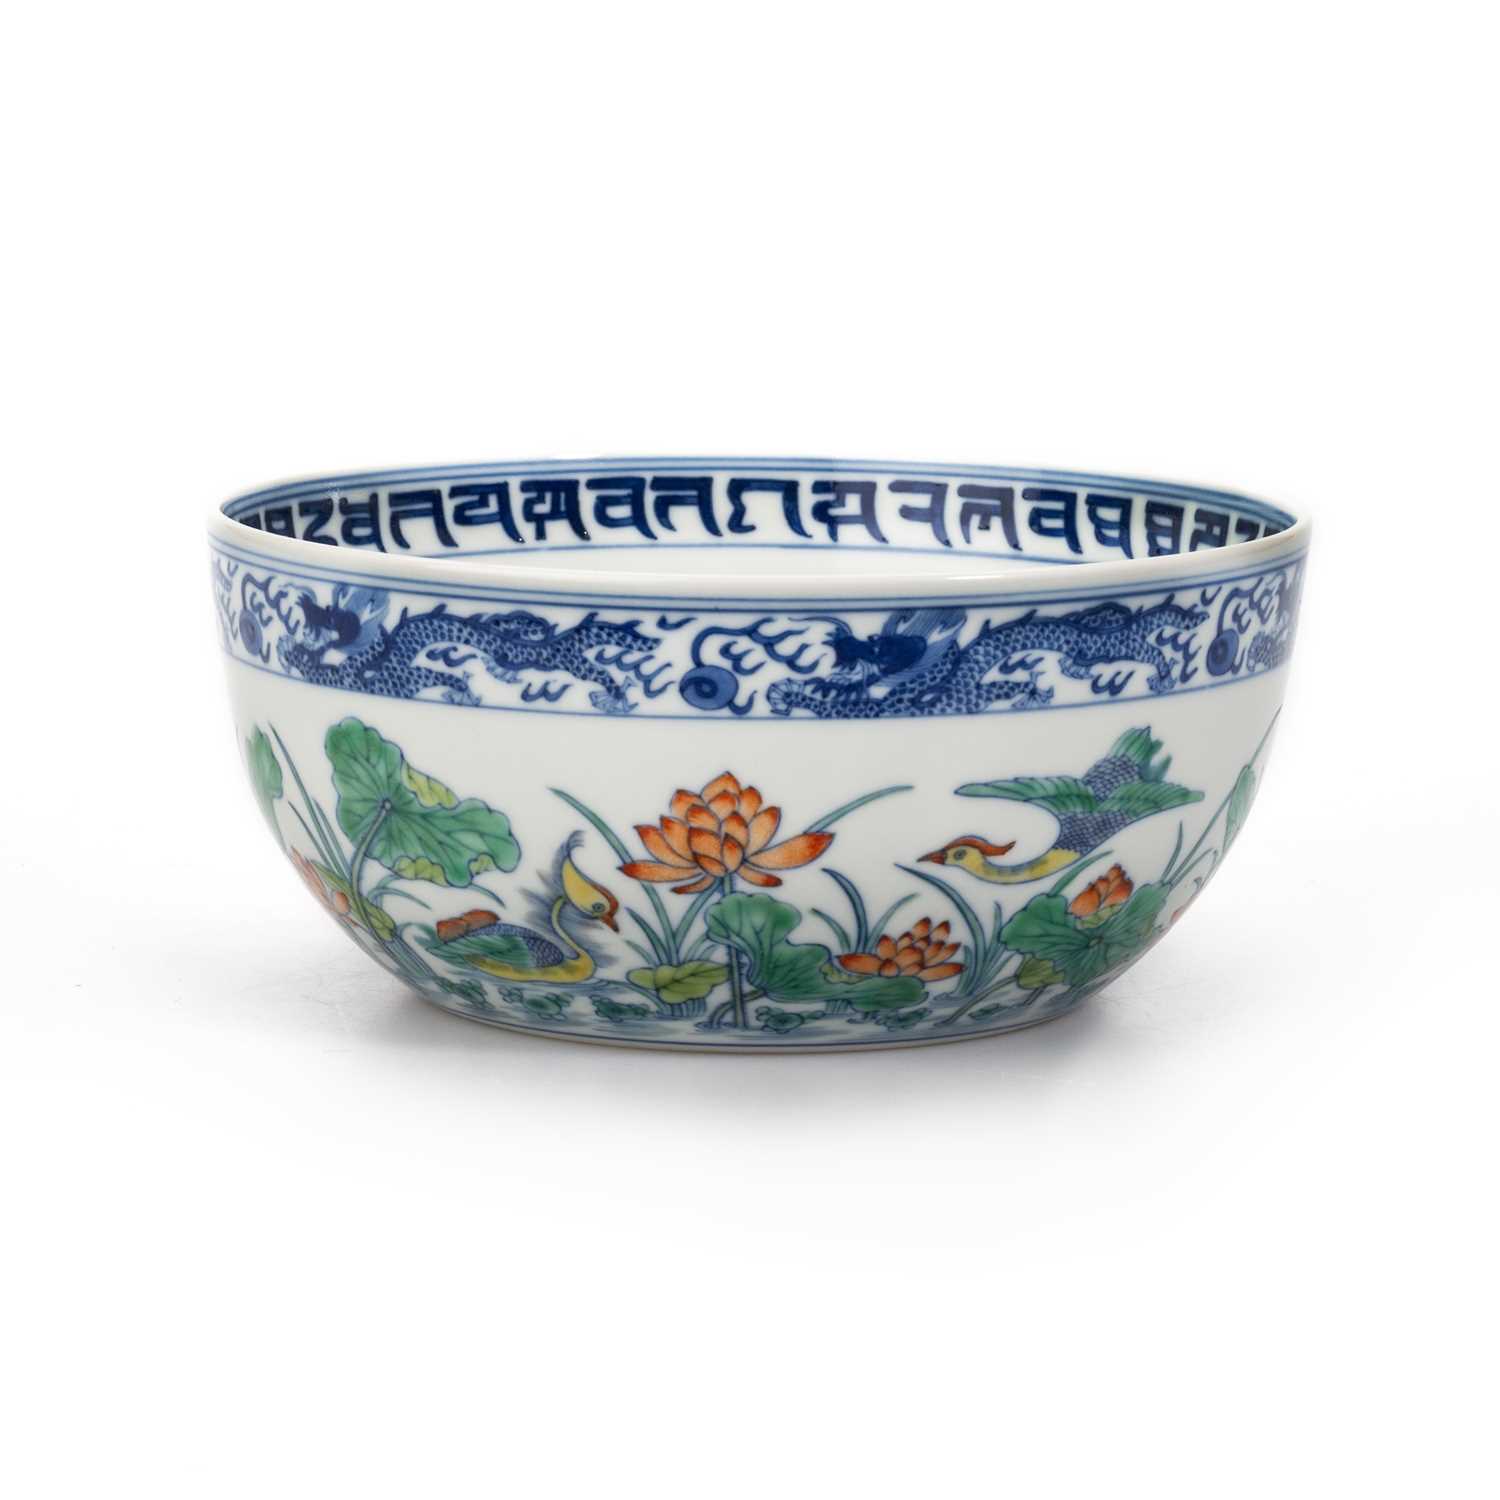 A CHINESE DOUCAI 'DUCK AND LOTUS' BOWL